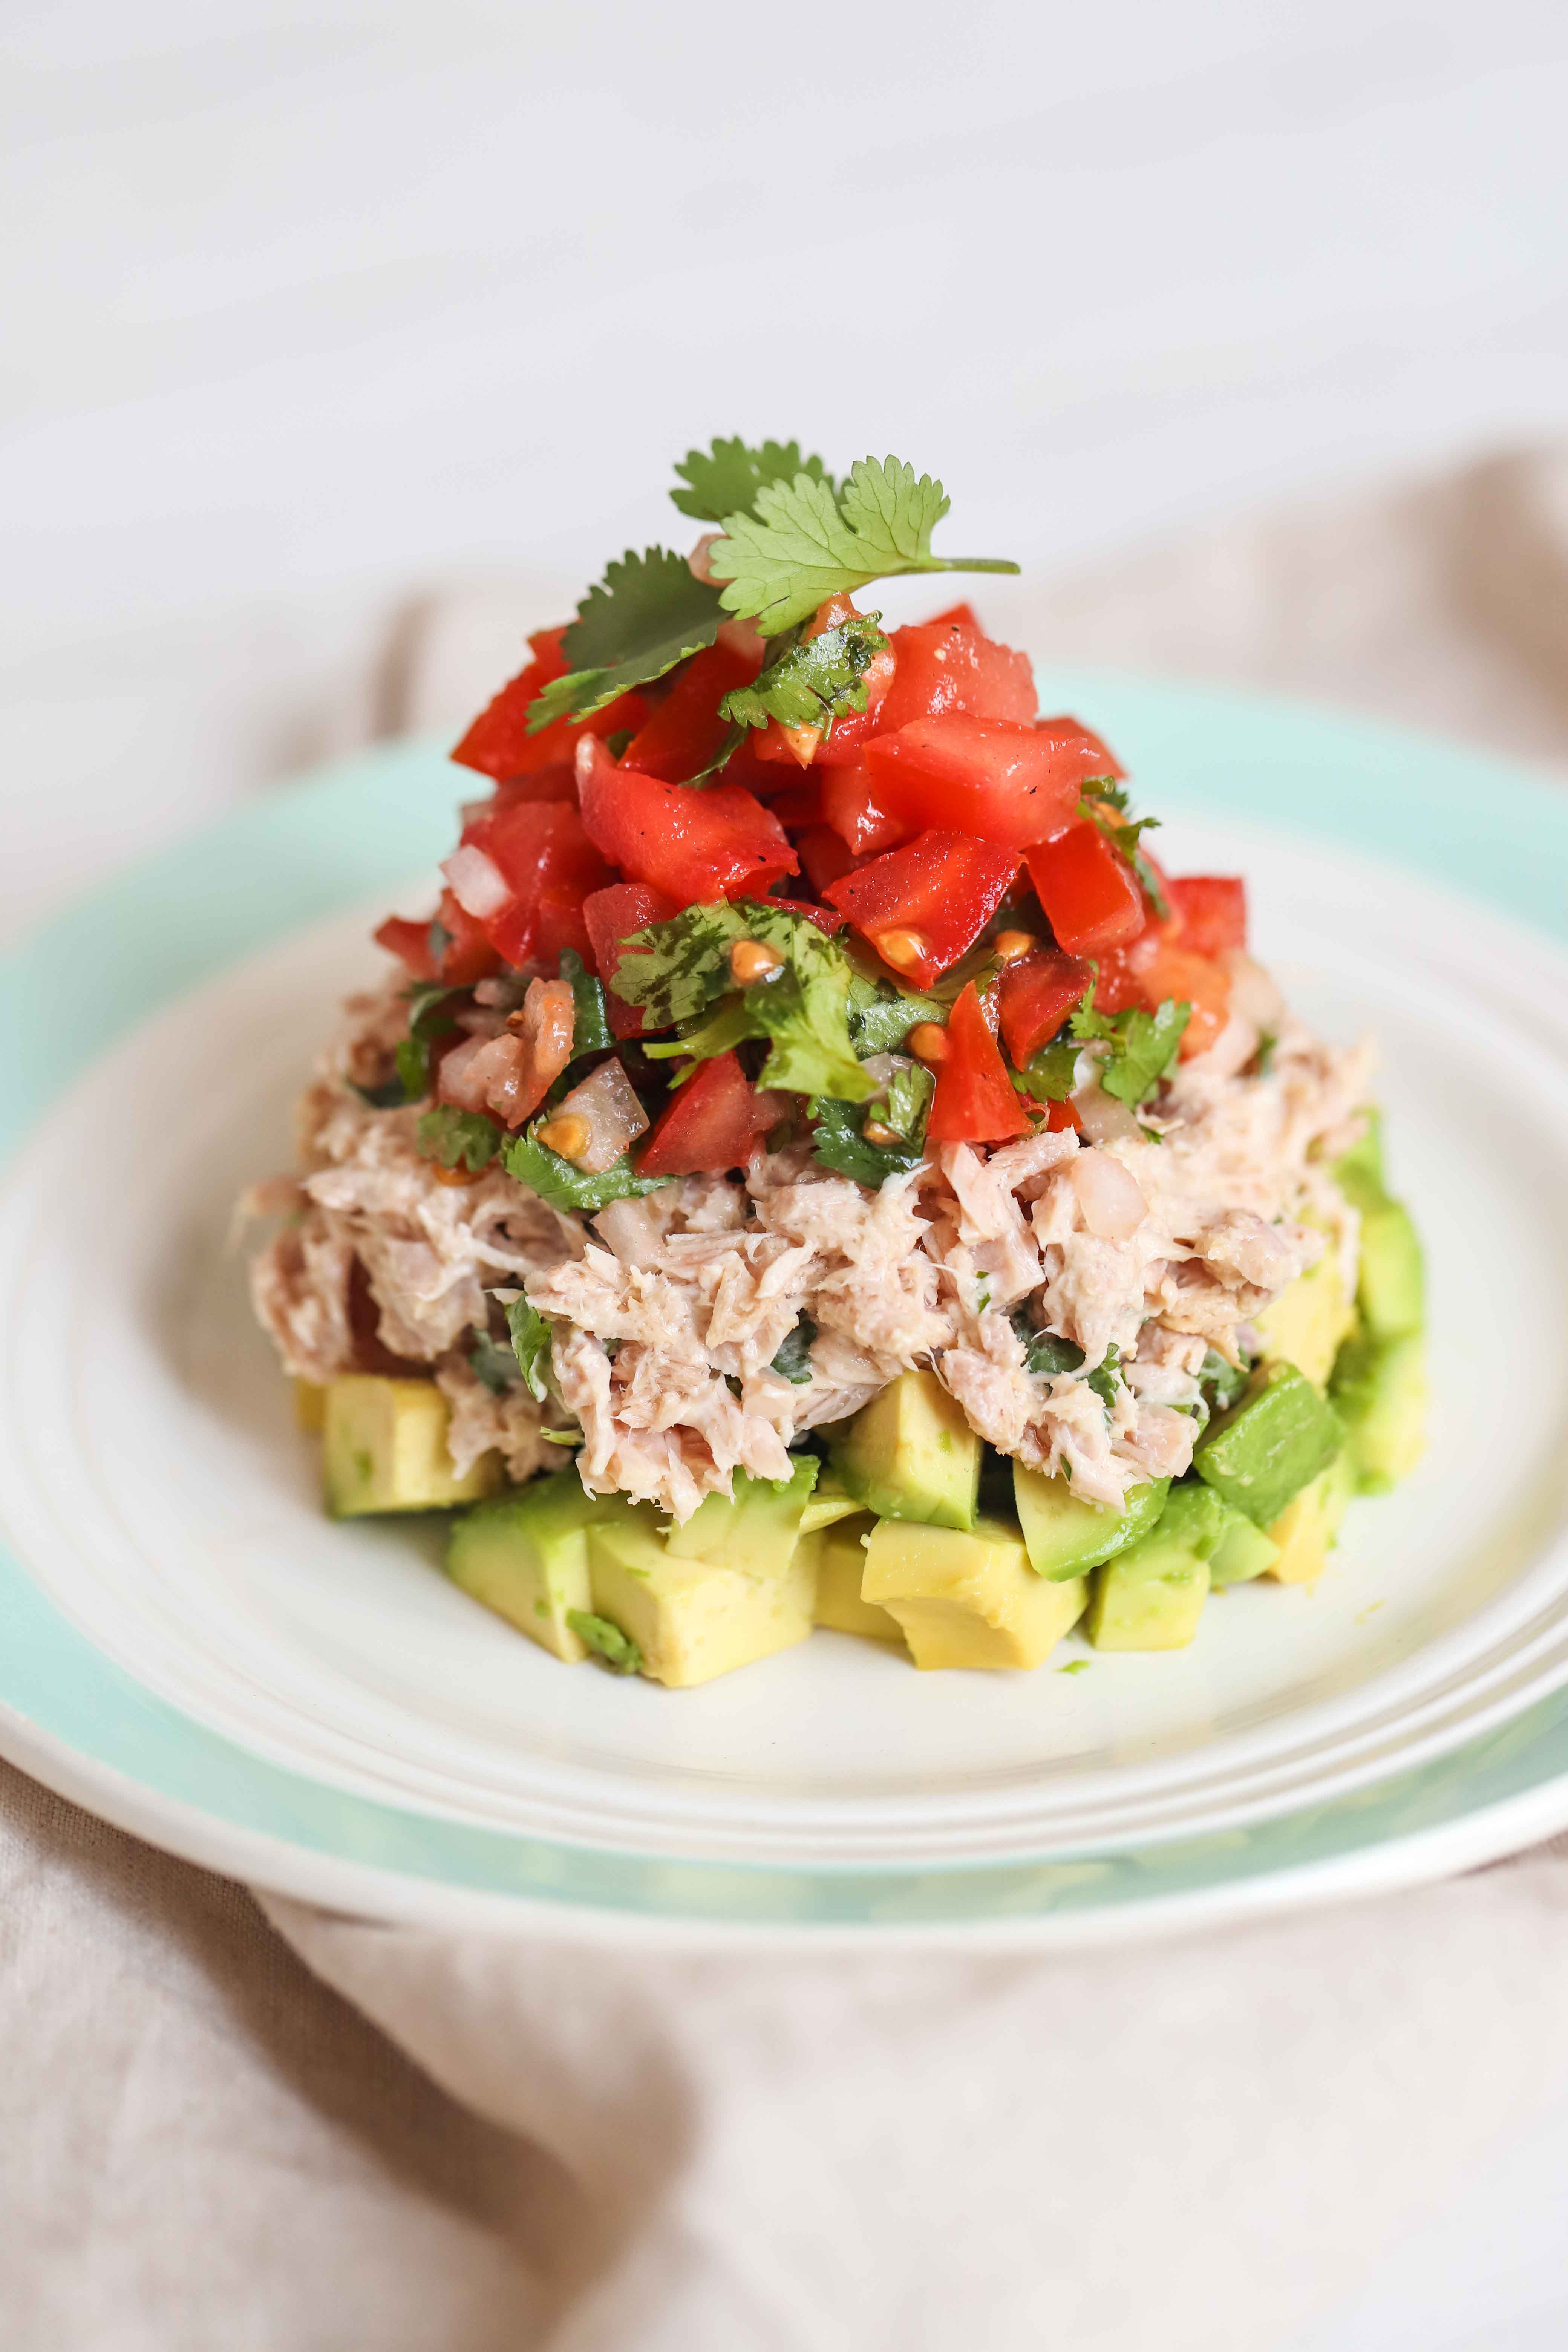 Avocado and tuna layered salad...full of healthy fats and protein, sure to keep you feeling full all afternoon.